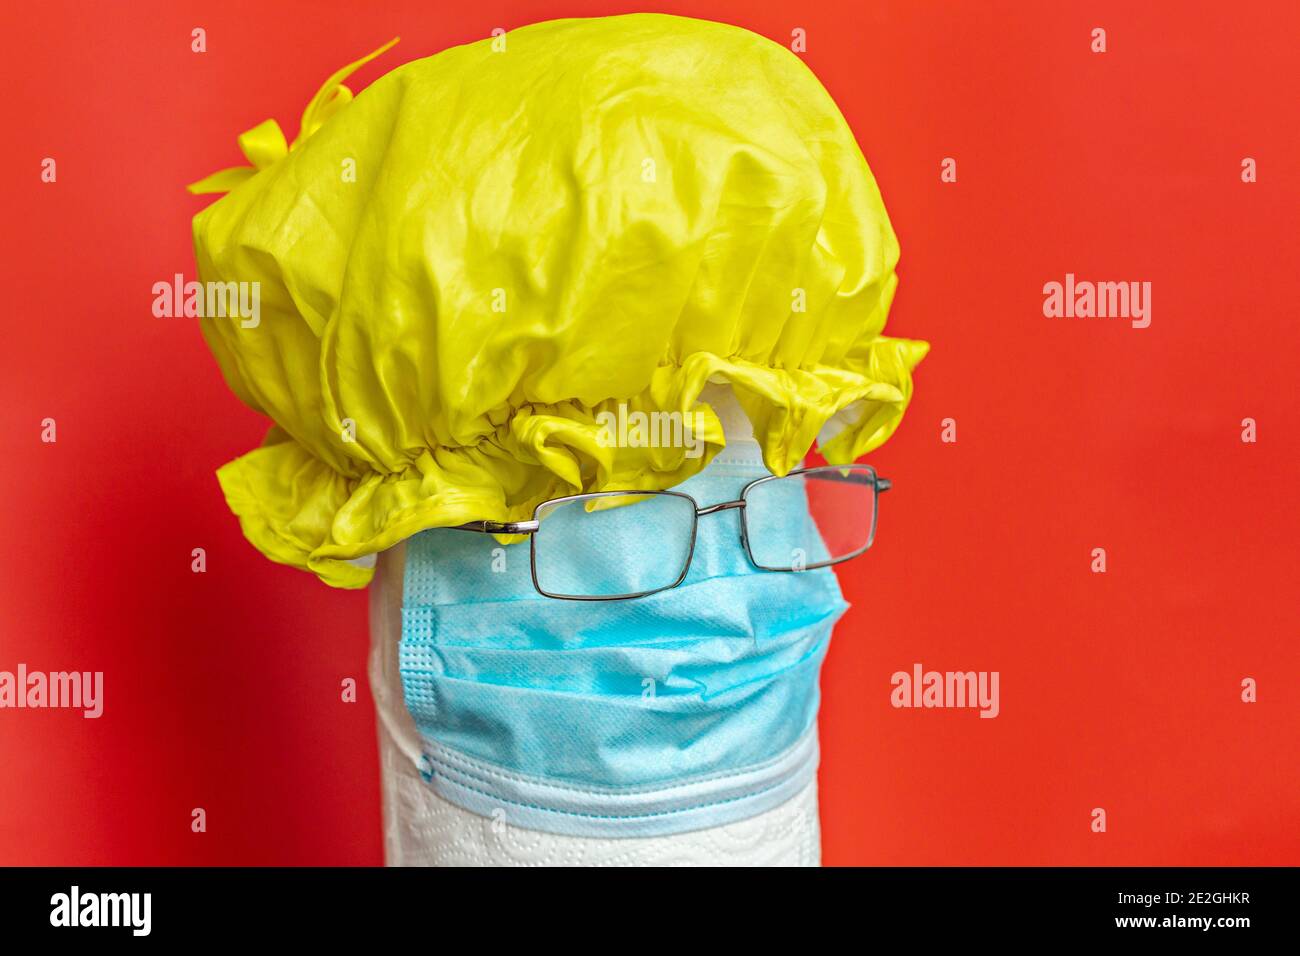 Shower cap, protective face mask and eyeglasses forming anthropomorphic face Stock Photo